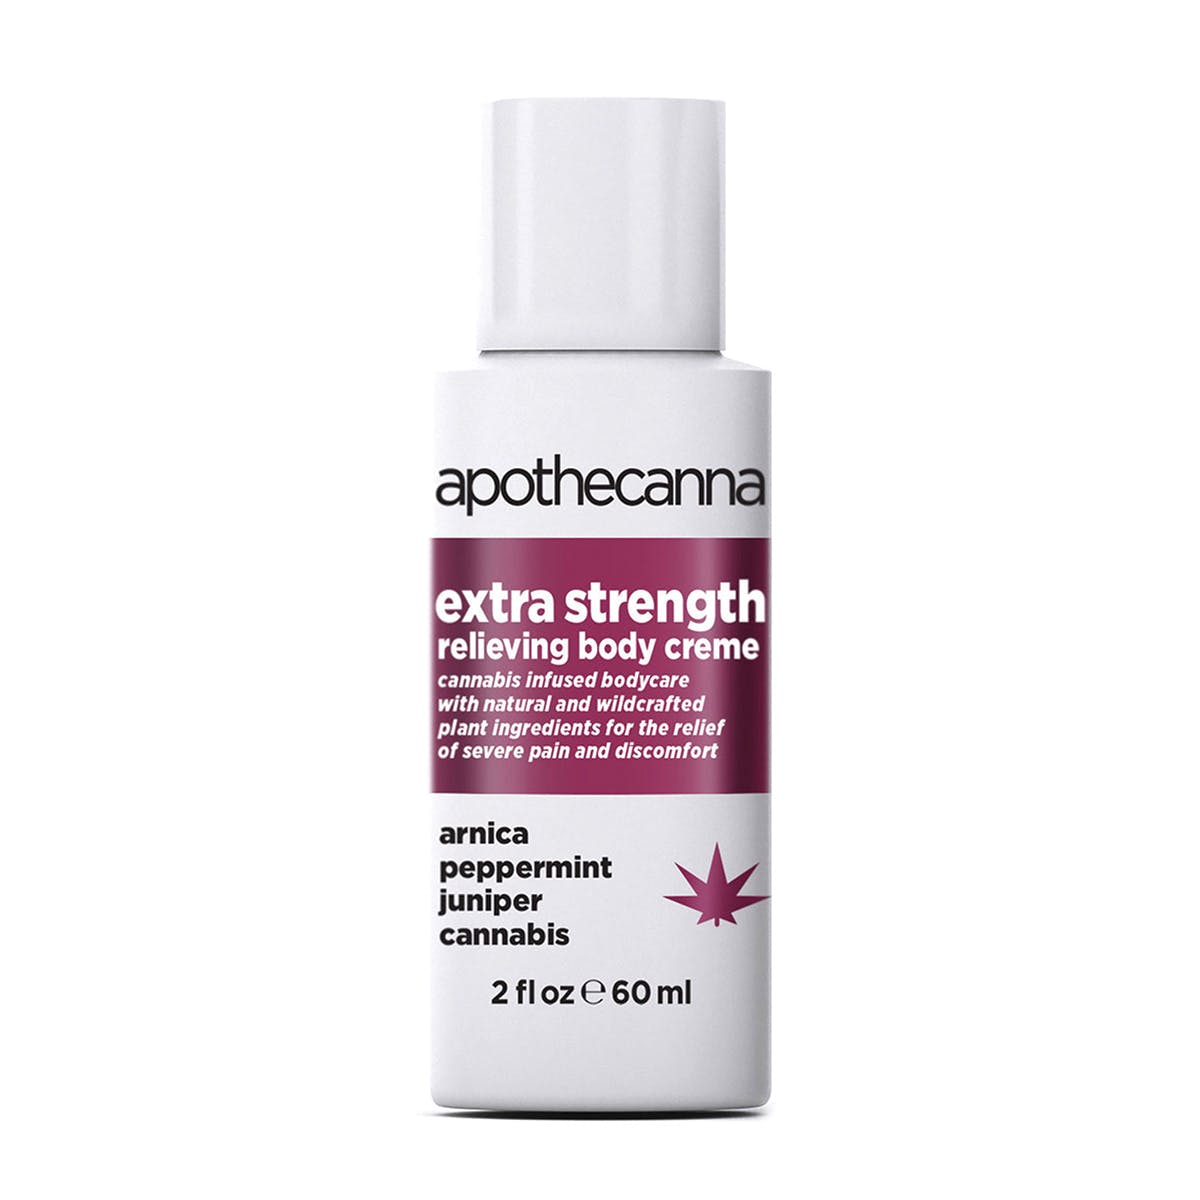 marijuana-dispensaries-lincoln-city-collective-in-lincoln-city-extra-strength-relieving-creme-2c-2-oz